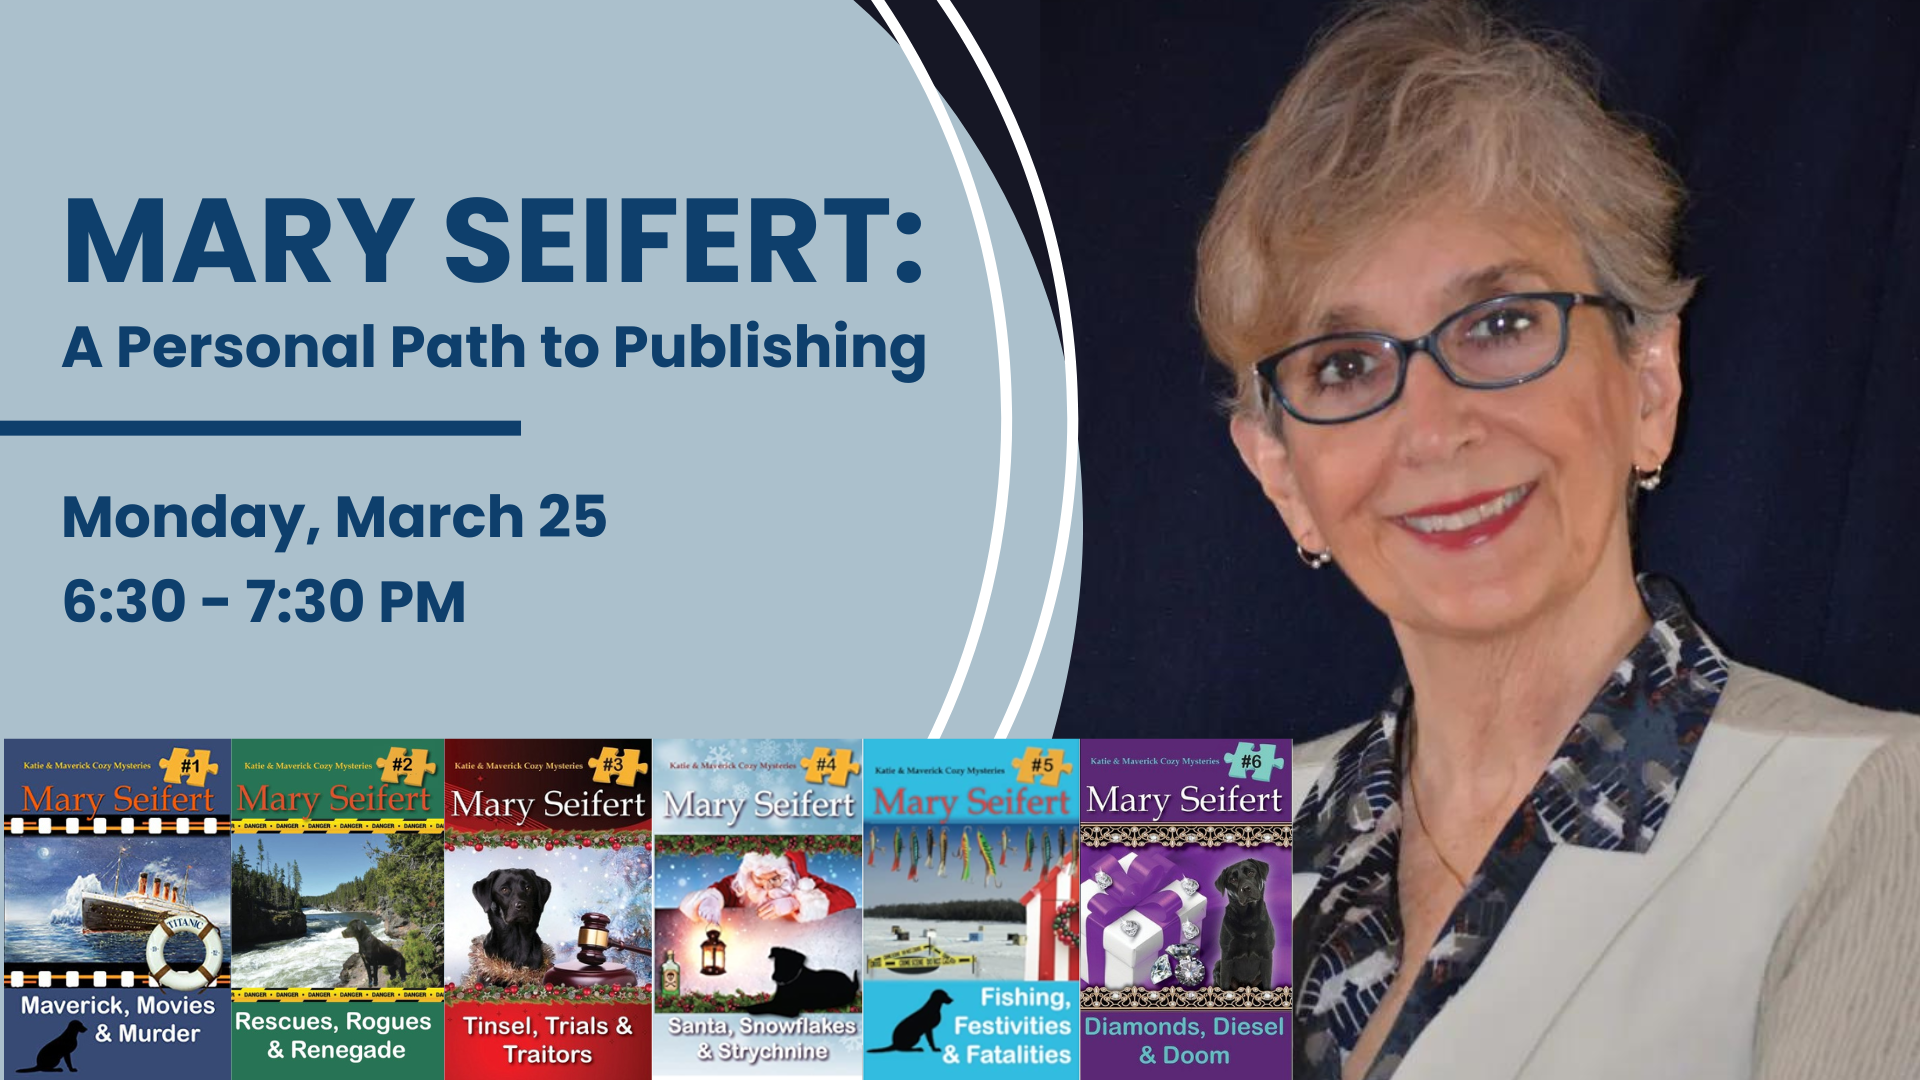 Photo of Mary Seifert; images of Seifer's book covers; date/time of program